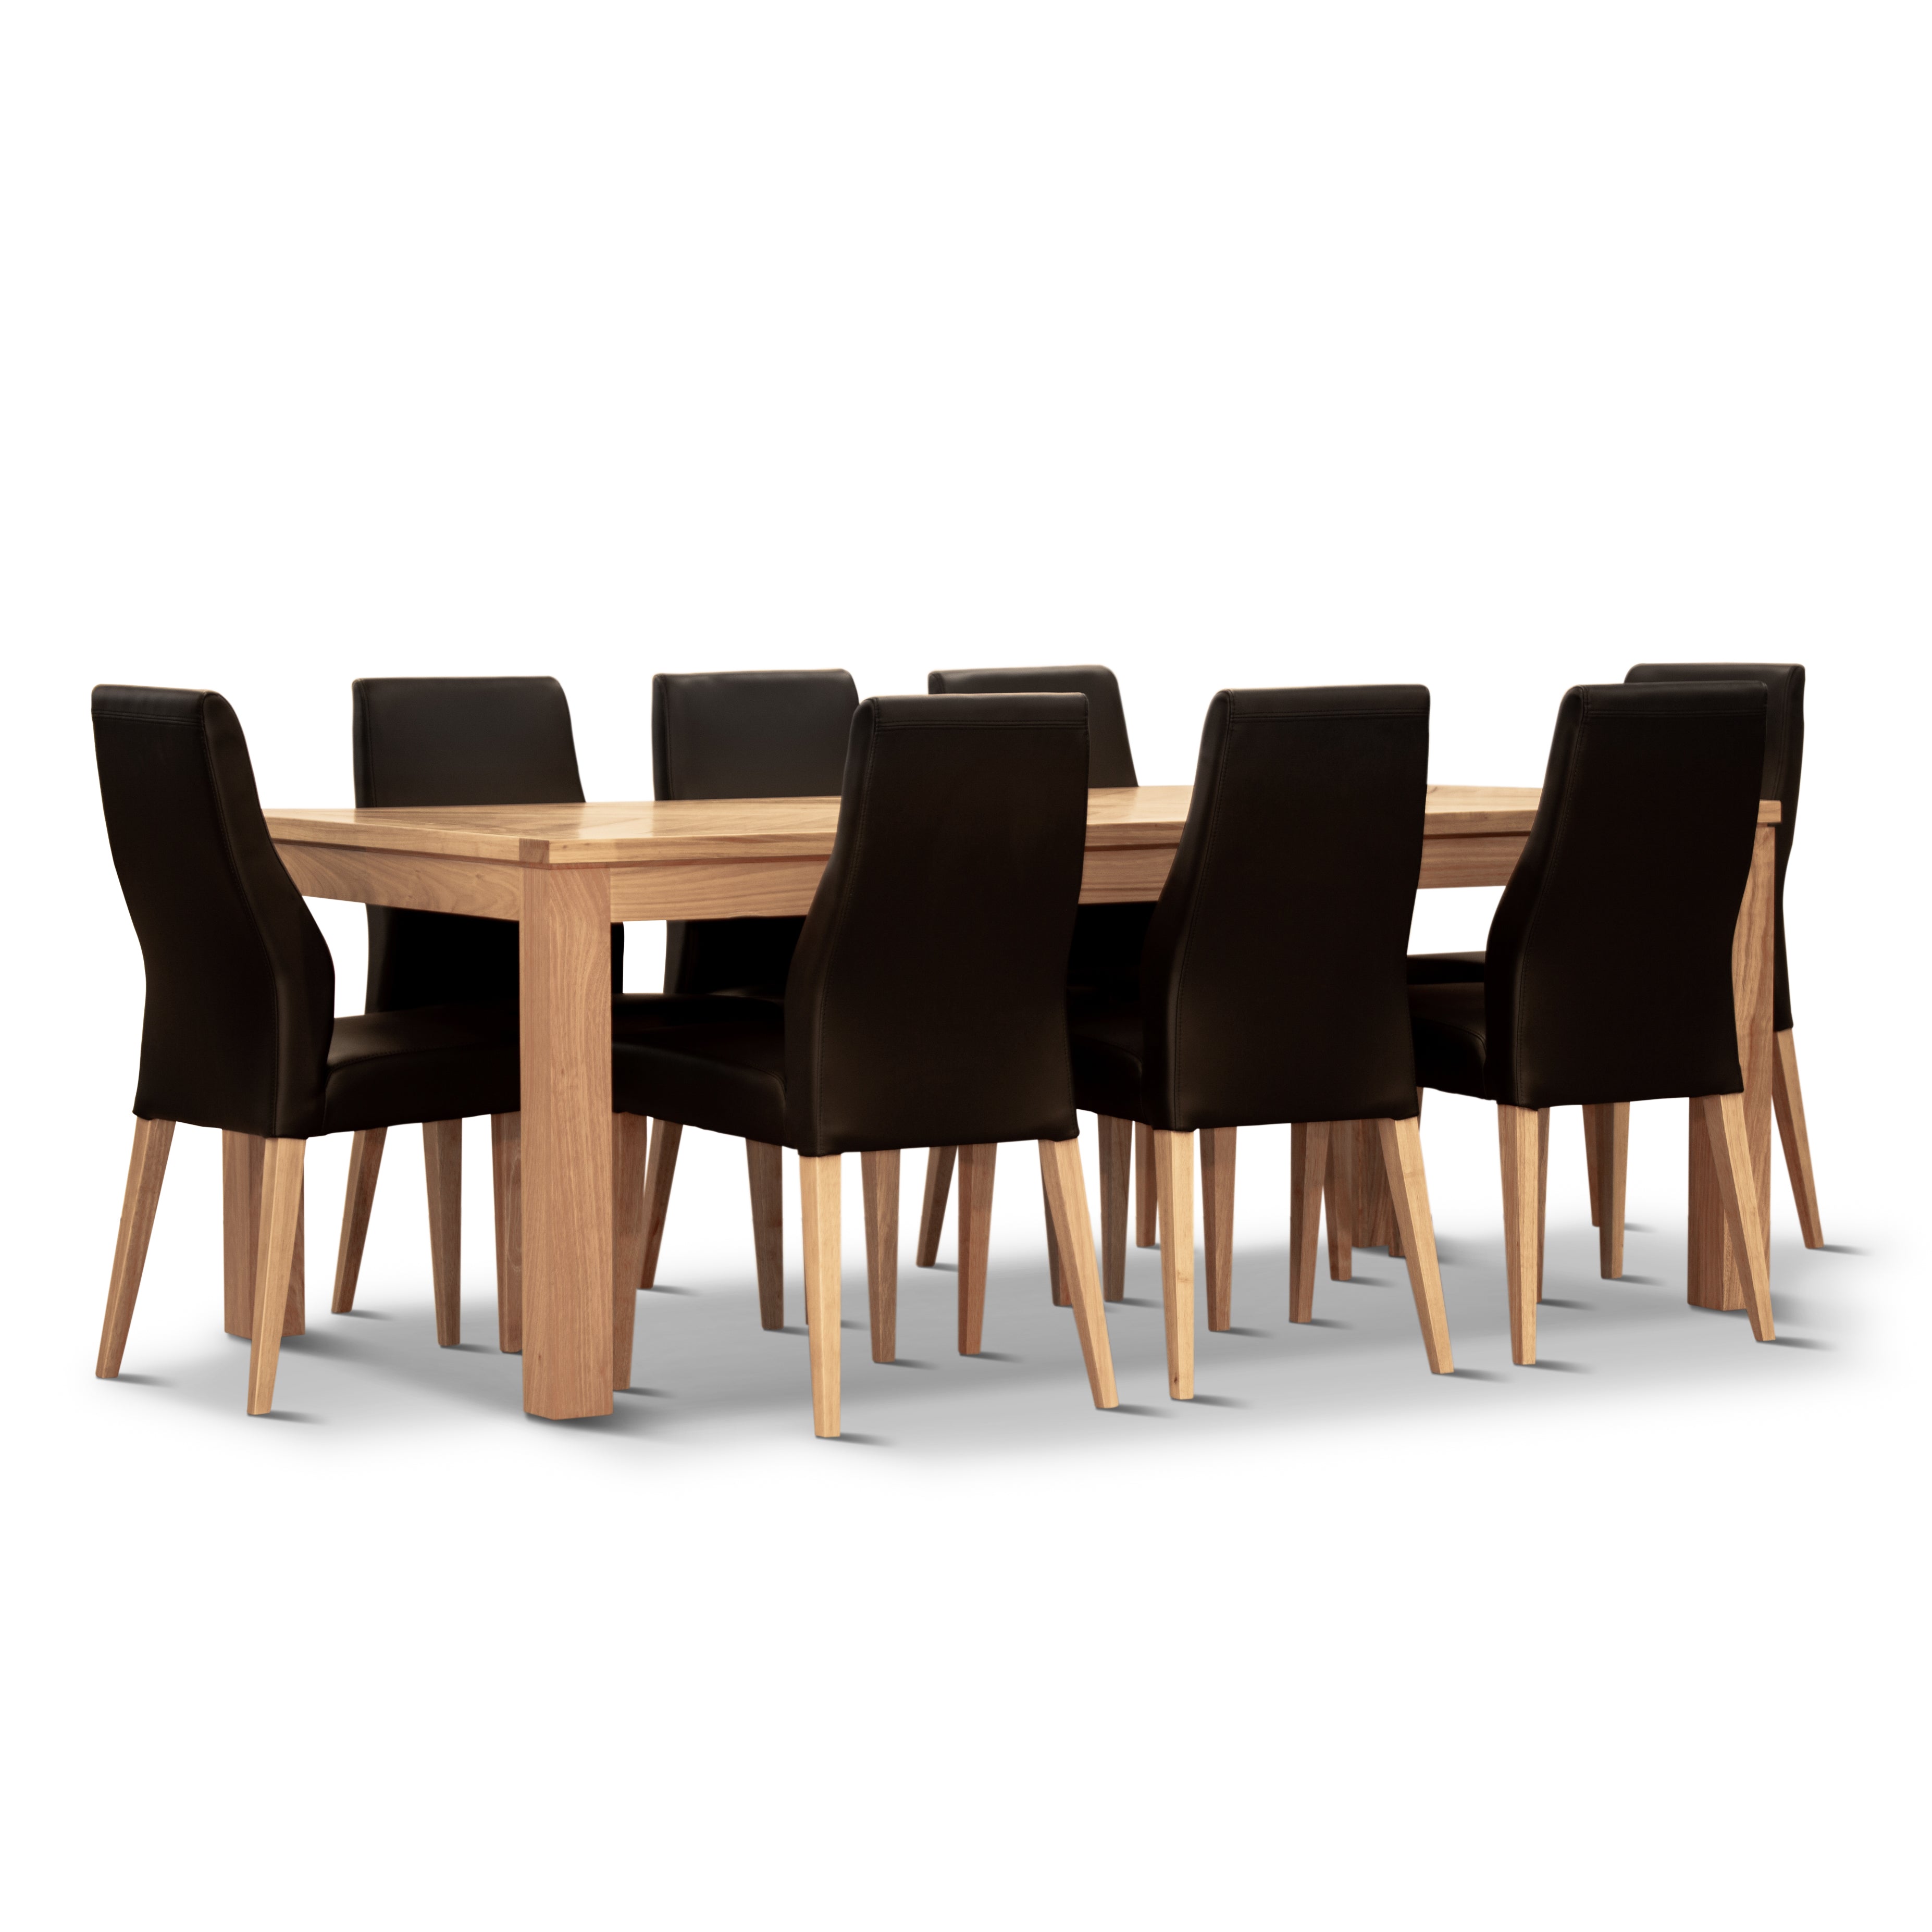 Elegant Dining Chair Set: PU Leather Seat, Solid Messmate Timber - Black